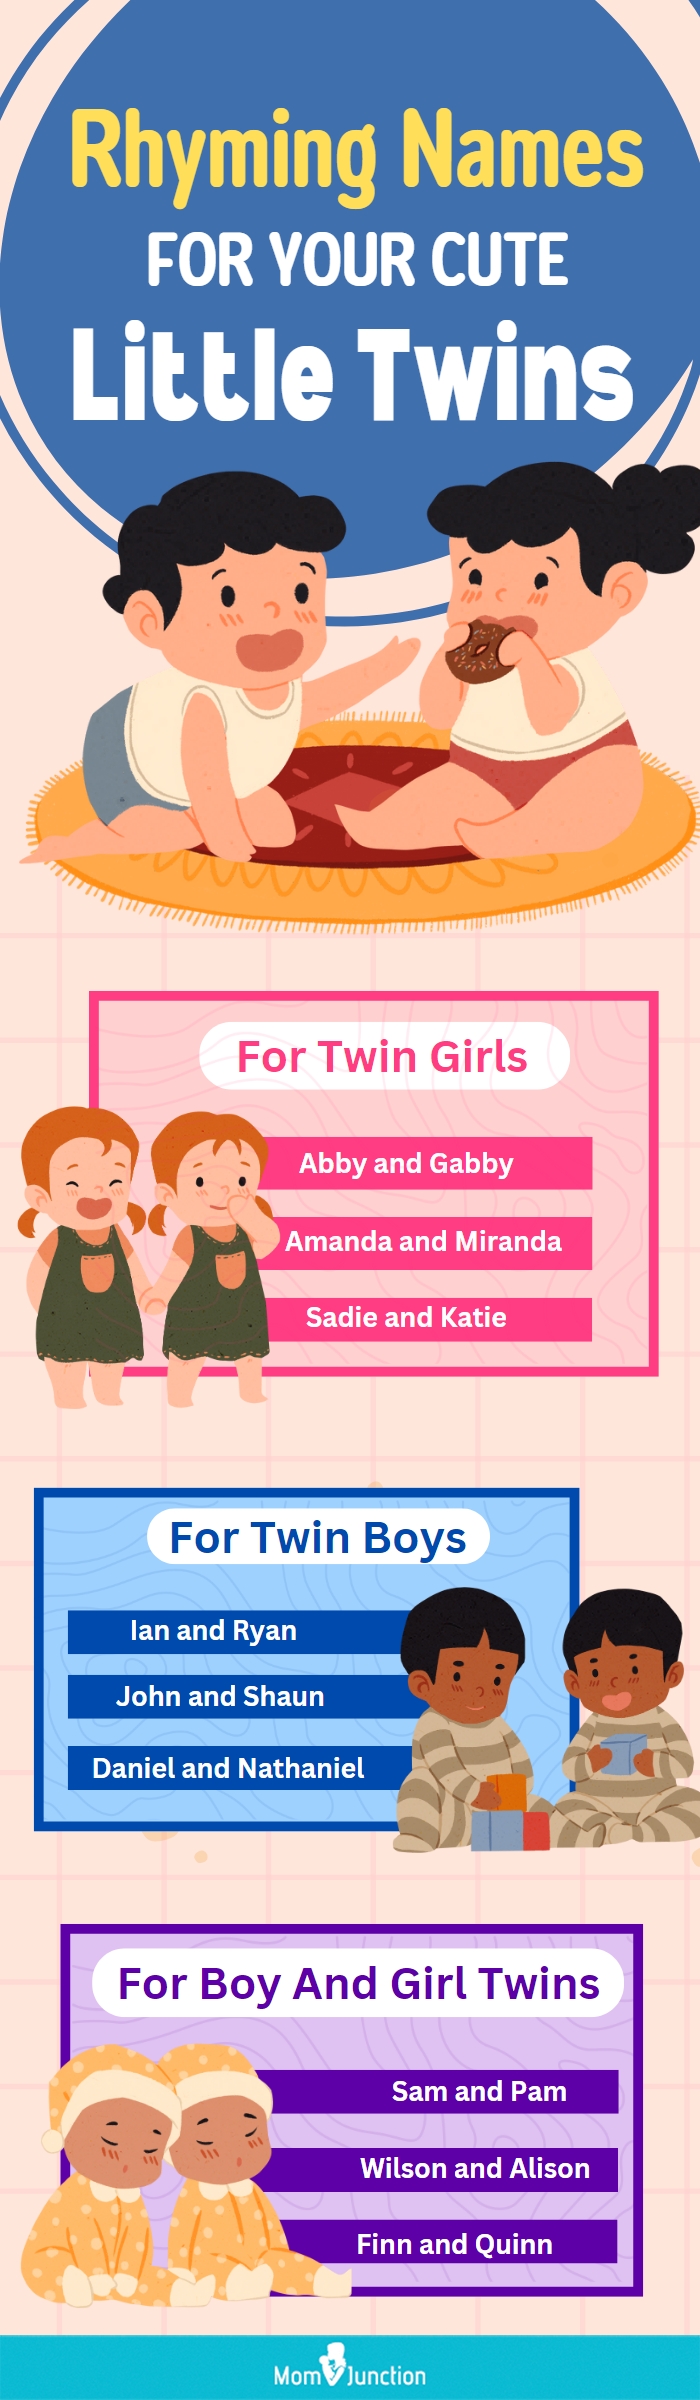 rhyming names for your cute little twins